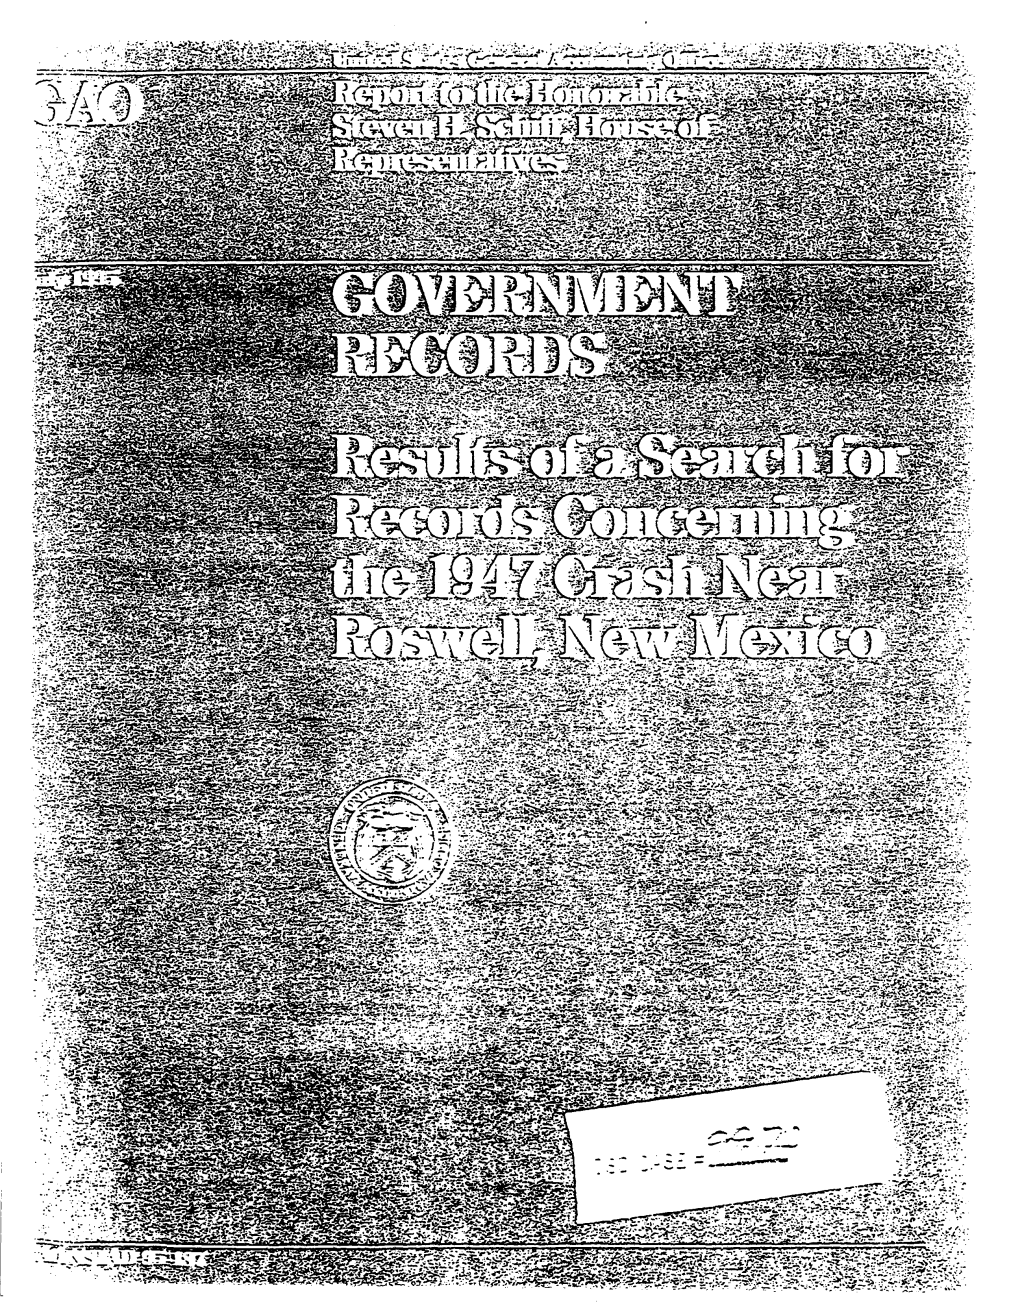 Government Records Concerning the Roswell Crash